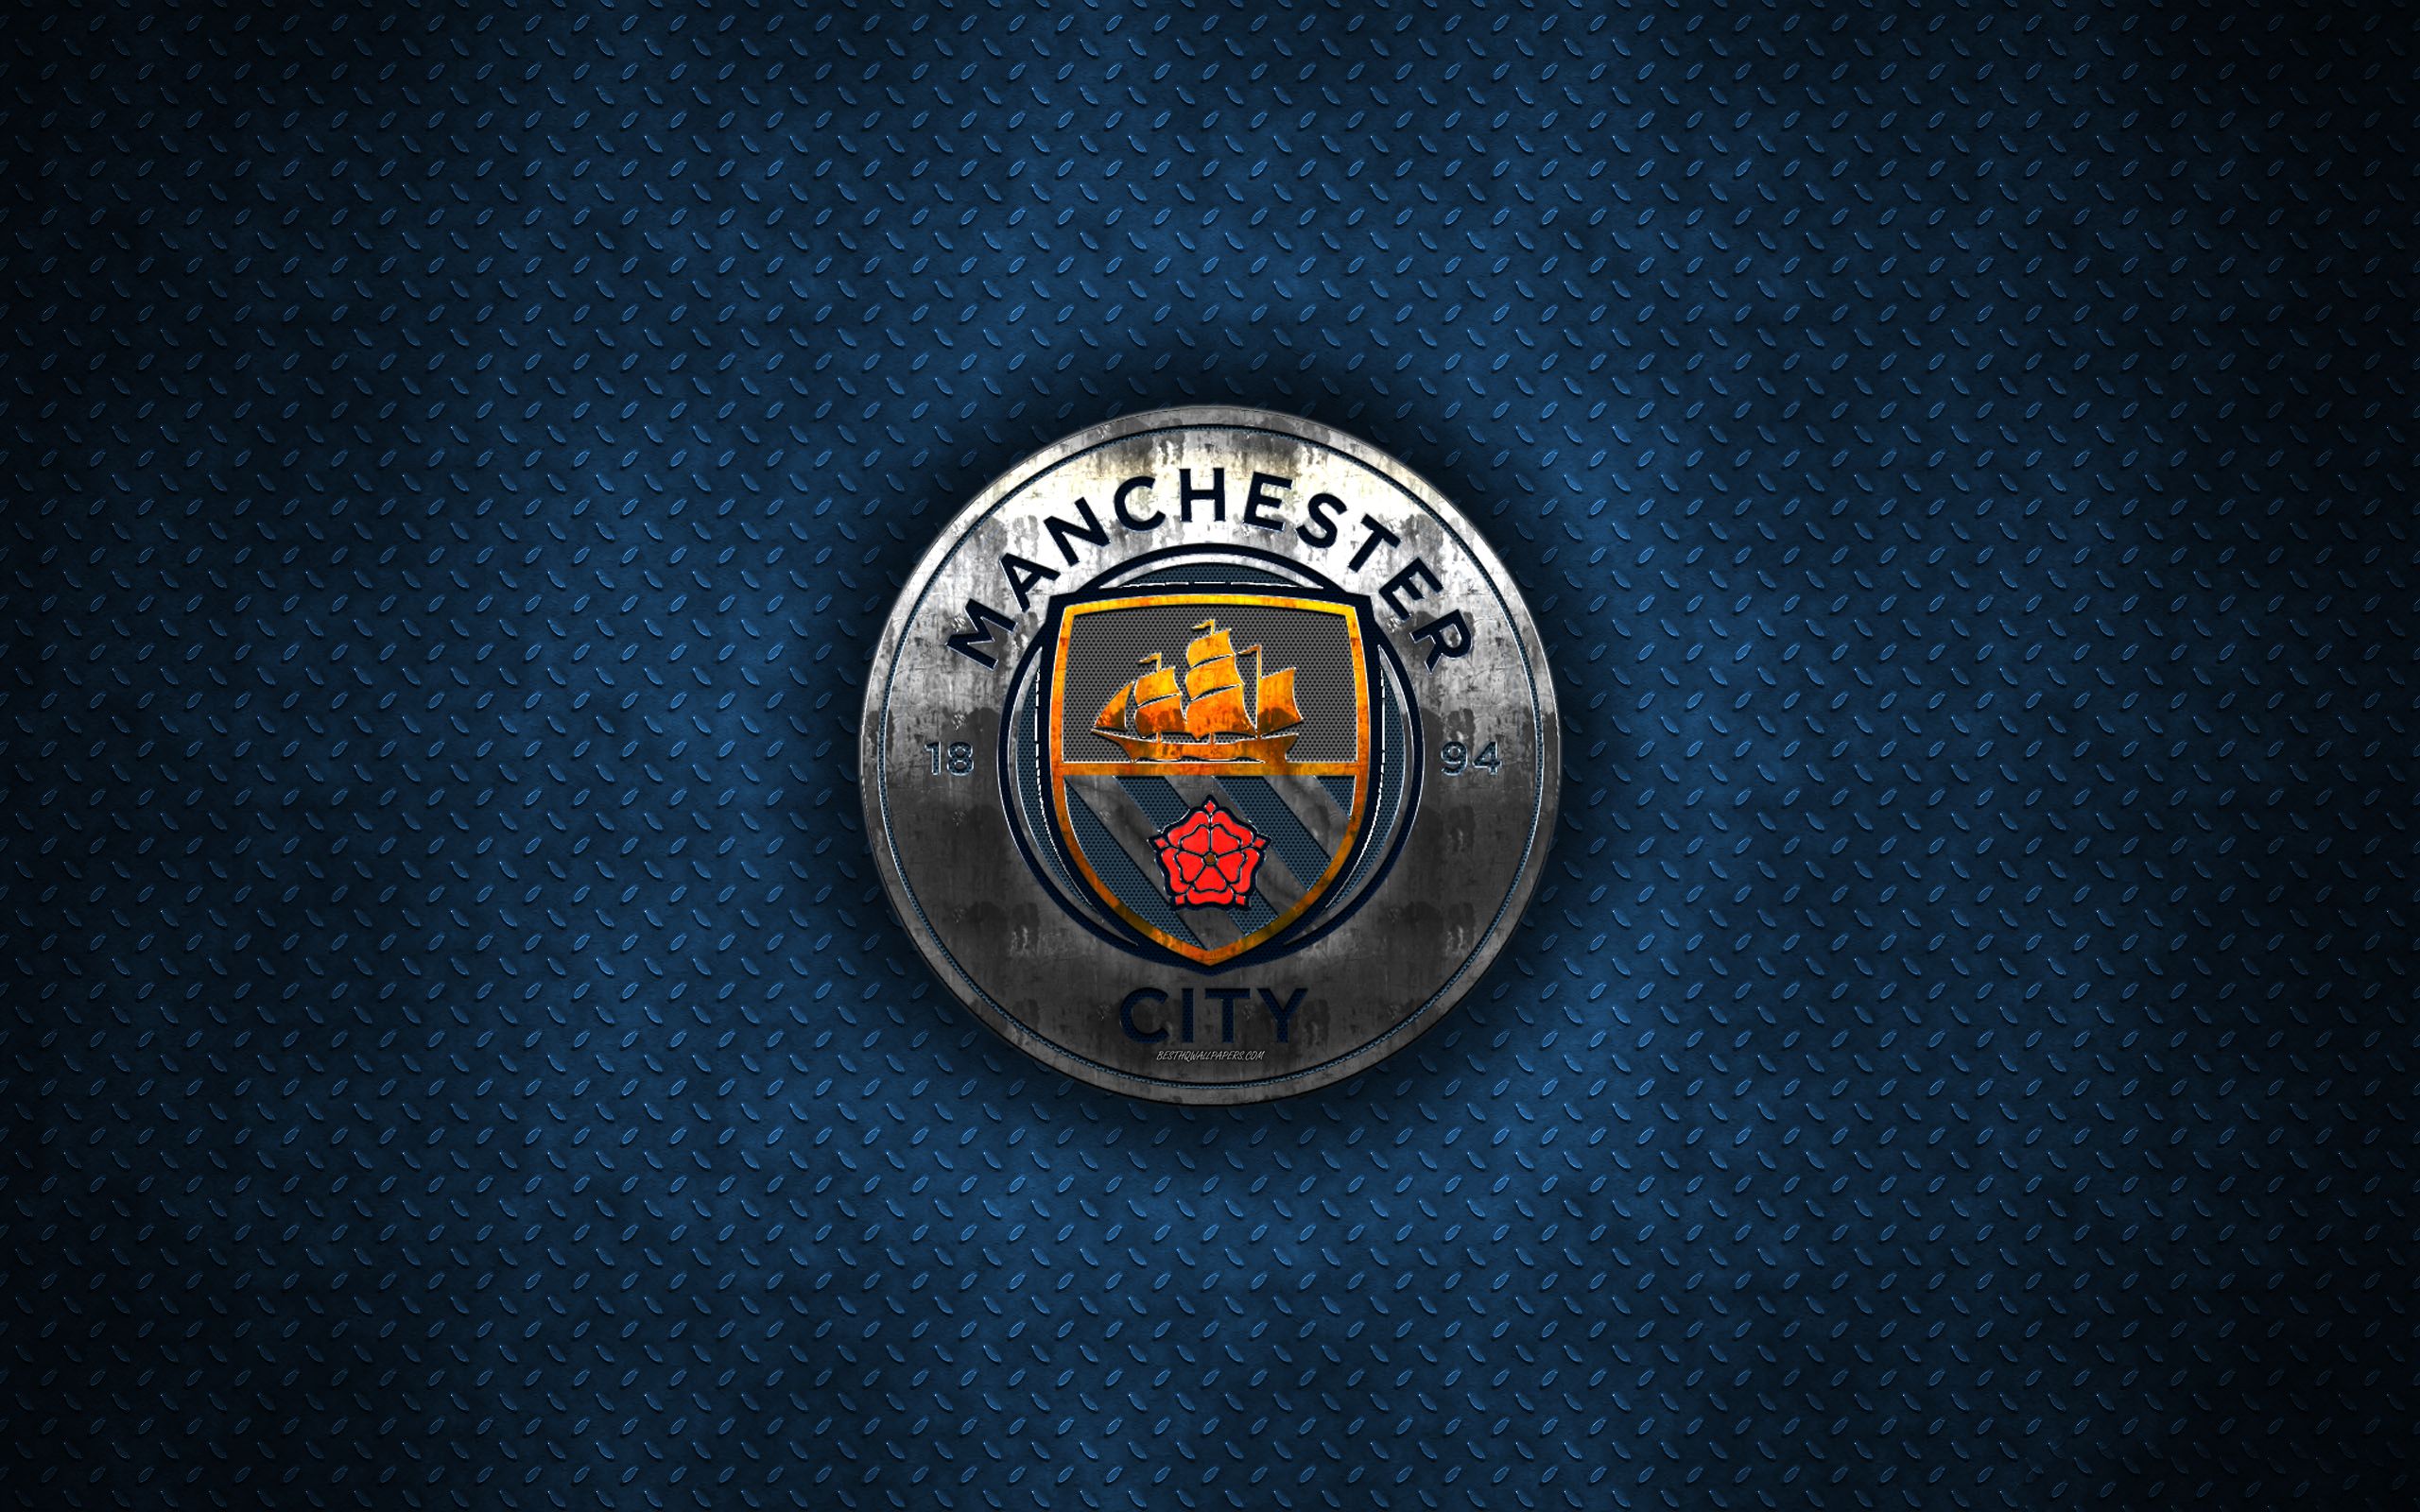 Download wallpaper Manchester City FC, 4k, metal logo, creative art, English football club, Premier League, emblem, blue metal background, Manchester, England, football for desktop with resolution 2560x1600. High Quality HD picture wallpaper